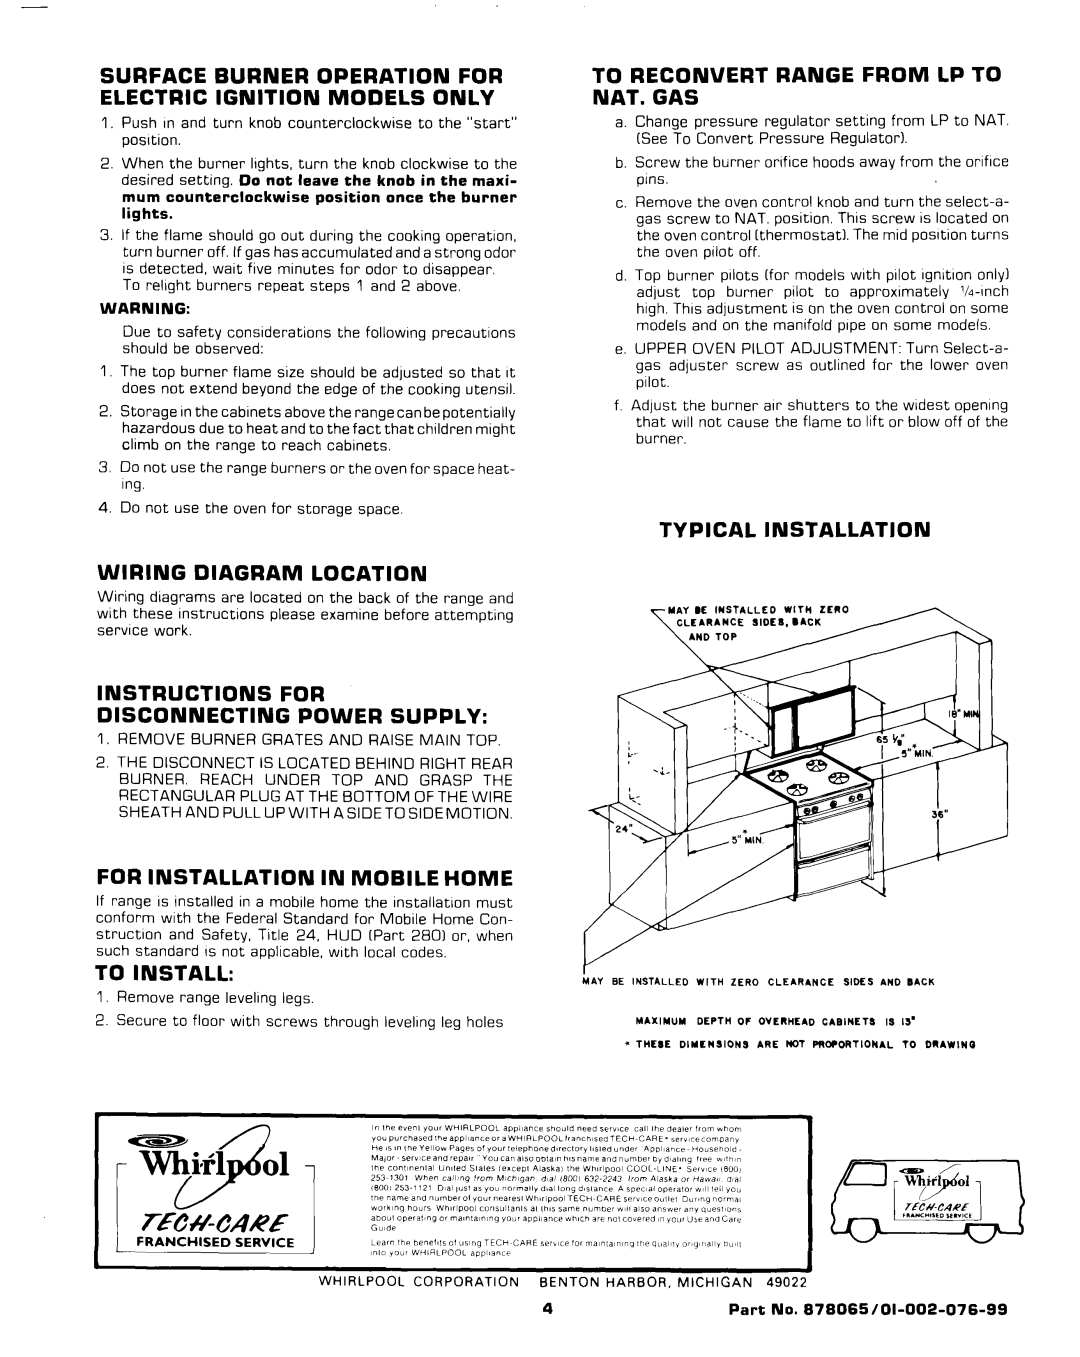 Whirlpool Range Wiring Diagram Location, Instructions For Disconnecting Power Supply, Typical Installation, To Install 